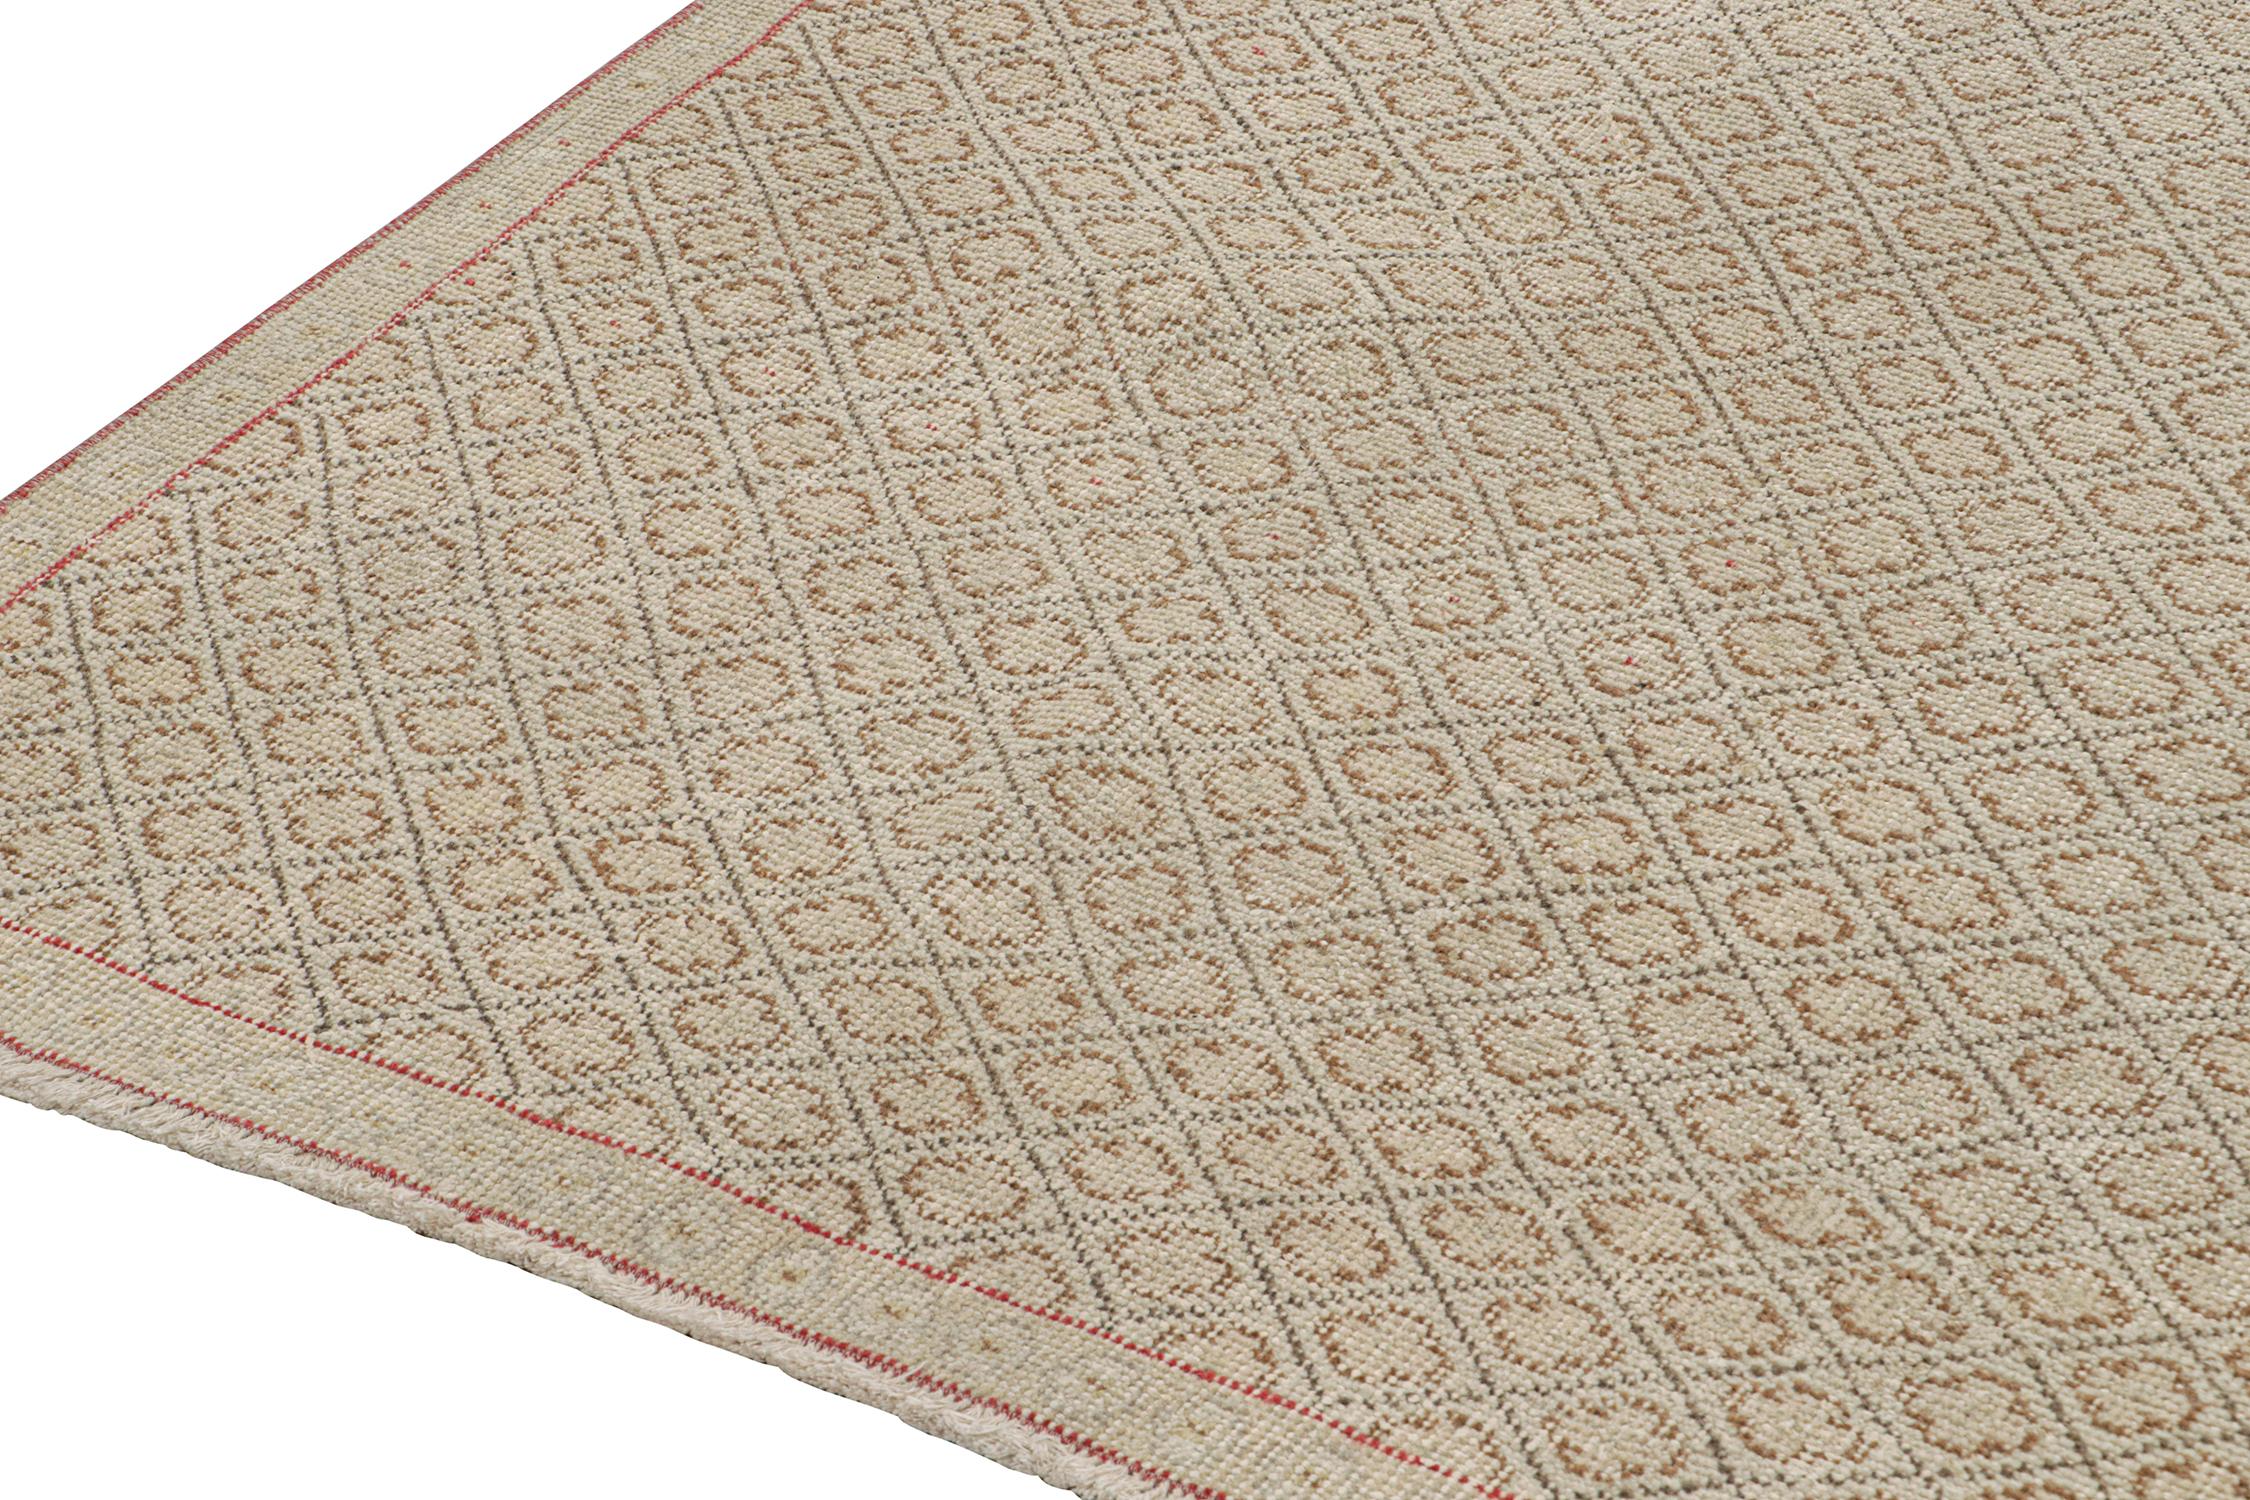 Vintage Zeki Müren Rug with Beige-Brown Geometric Pattern by Rug & Kilim In Good Condition For Sale In Long Island City, NY